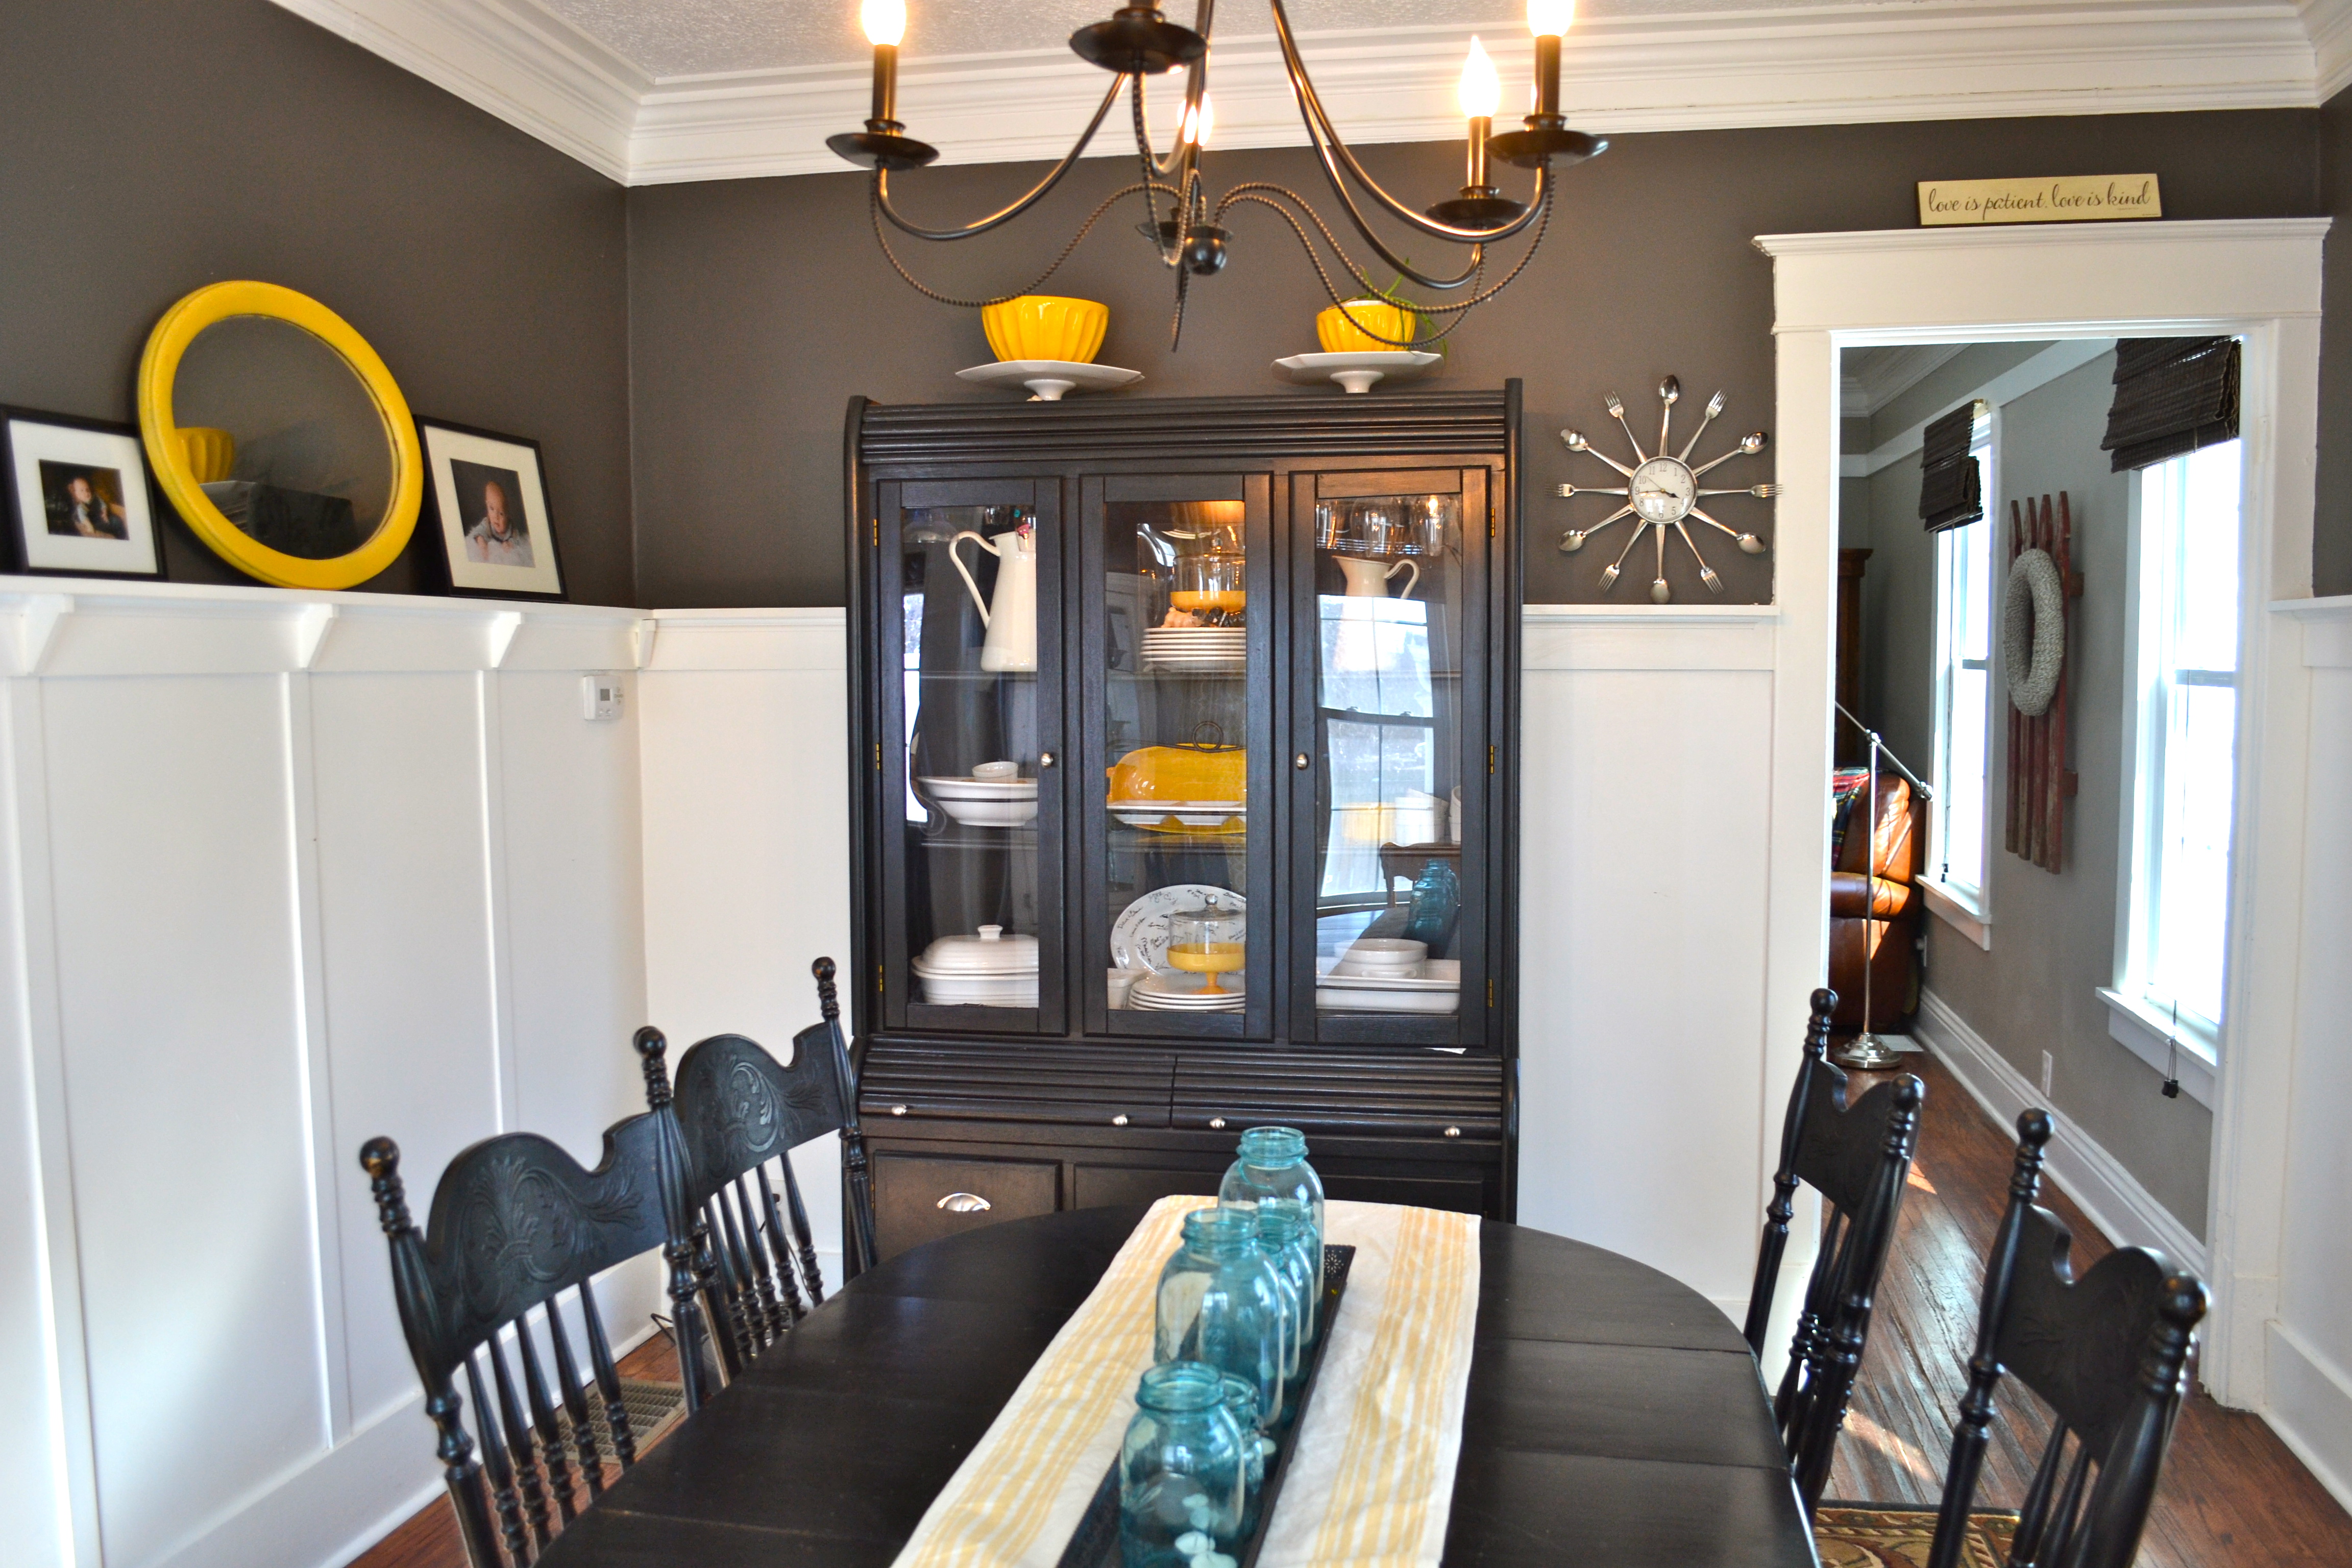 Painting A Dining Room Table Grey, How To Paint A Dining Room Table And Chairs Black